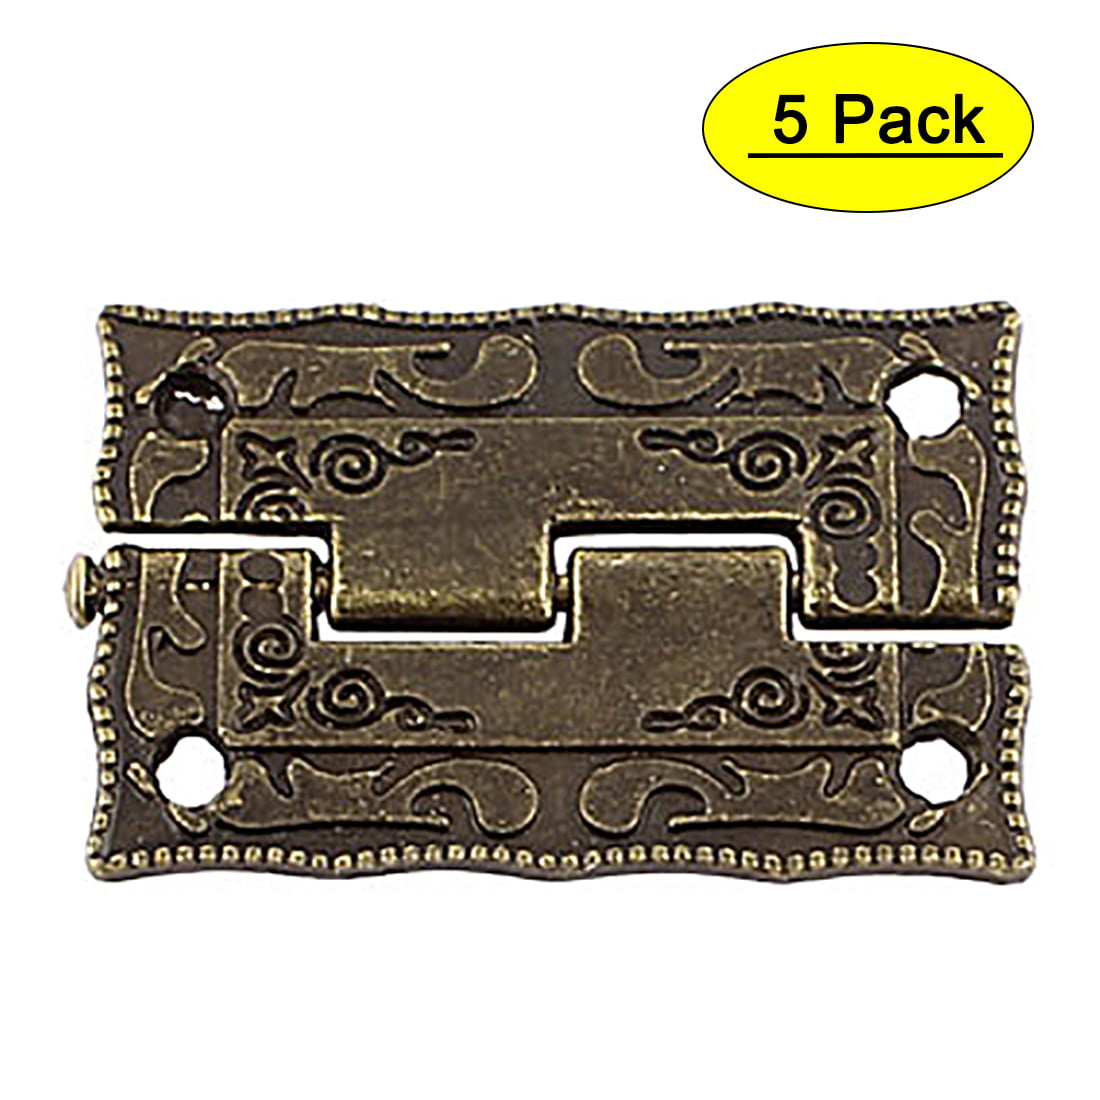 uxcell Jewelry Gift Box Case 28mm Length Vintage Style Hinges Bronze Tone 8PCS US-SA-AJD-219023